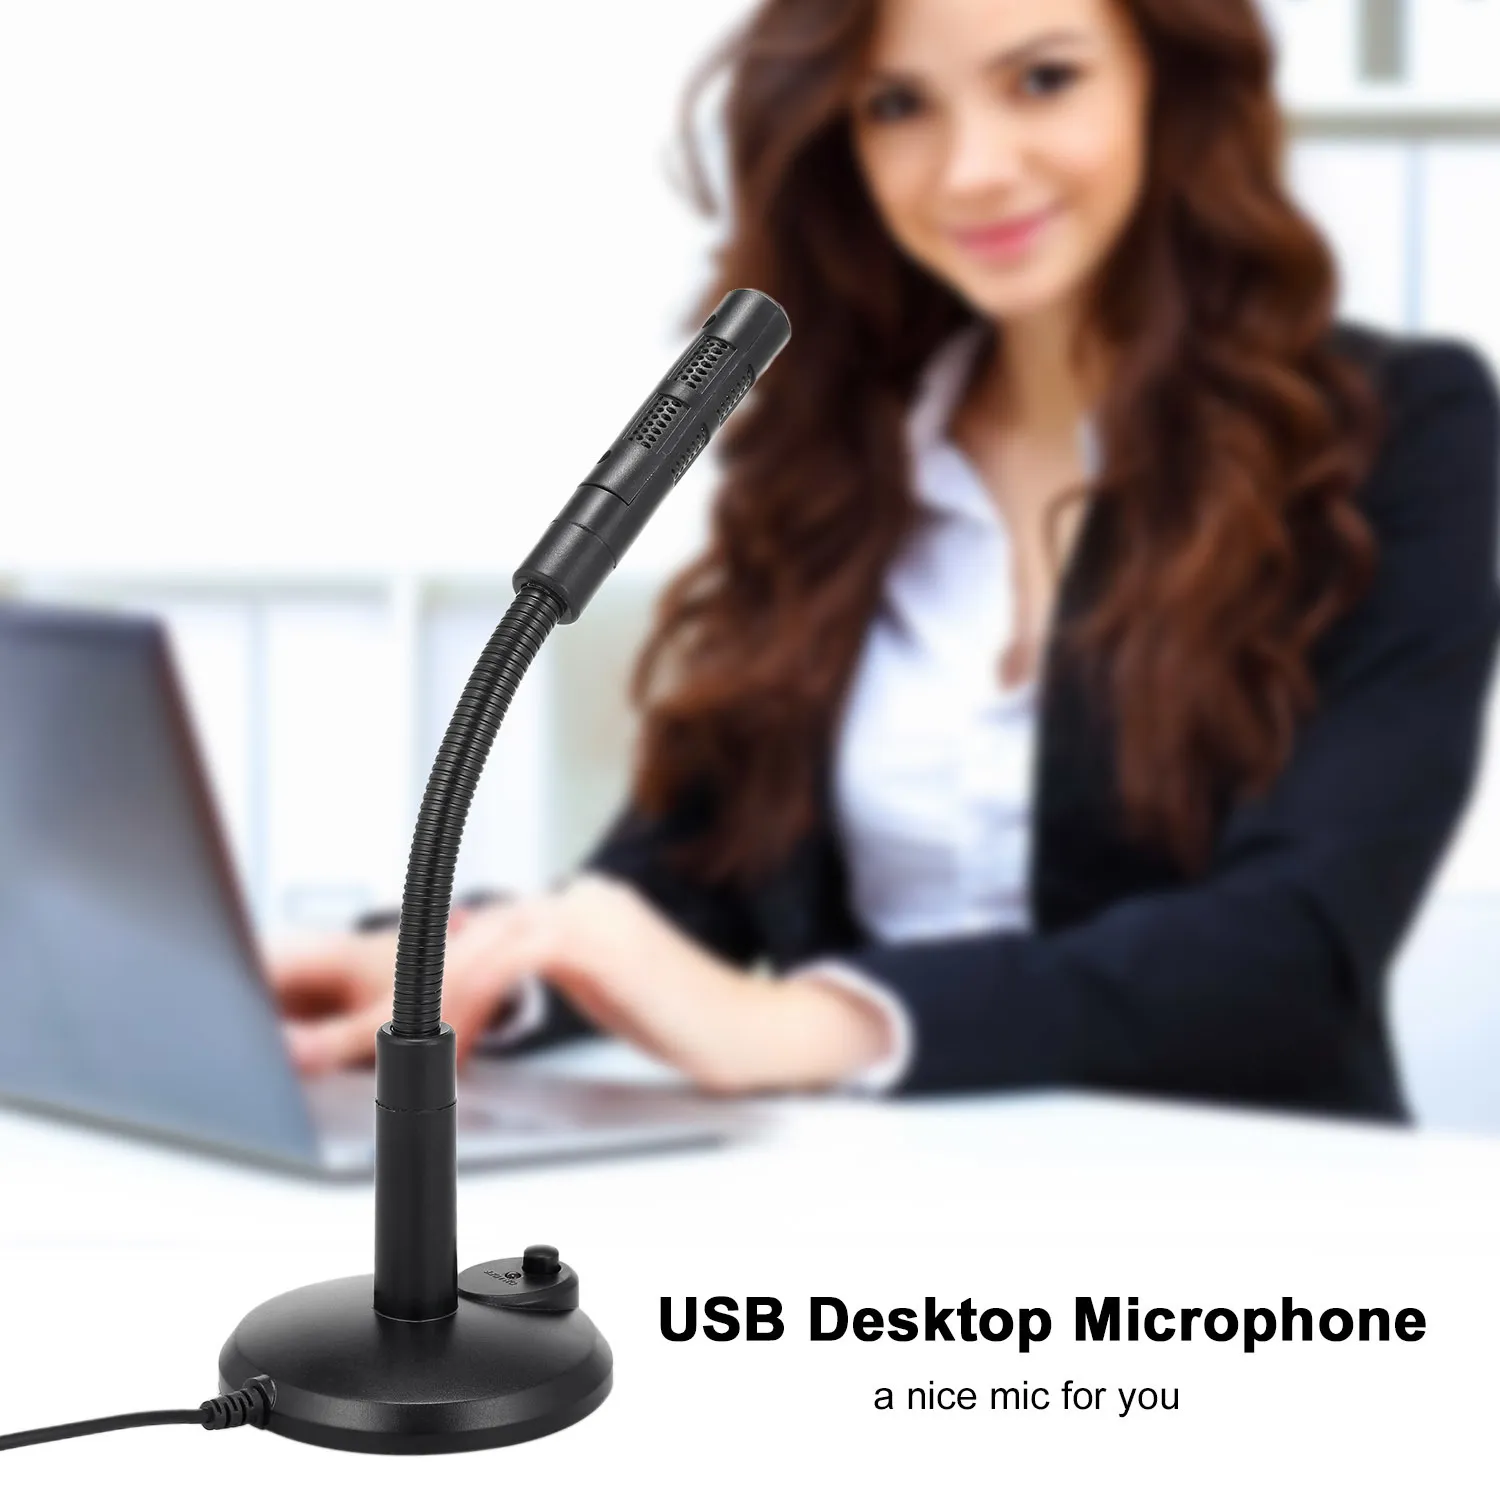 360° Adjustable USB Desktop Microphone Plug & Play Omnidirectional PC Laptop Computer Mic Conference Call Voice Recording